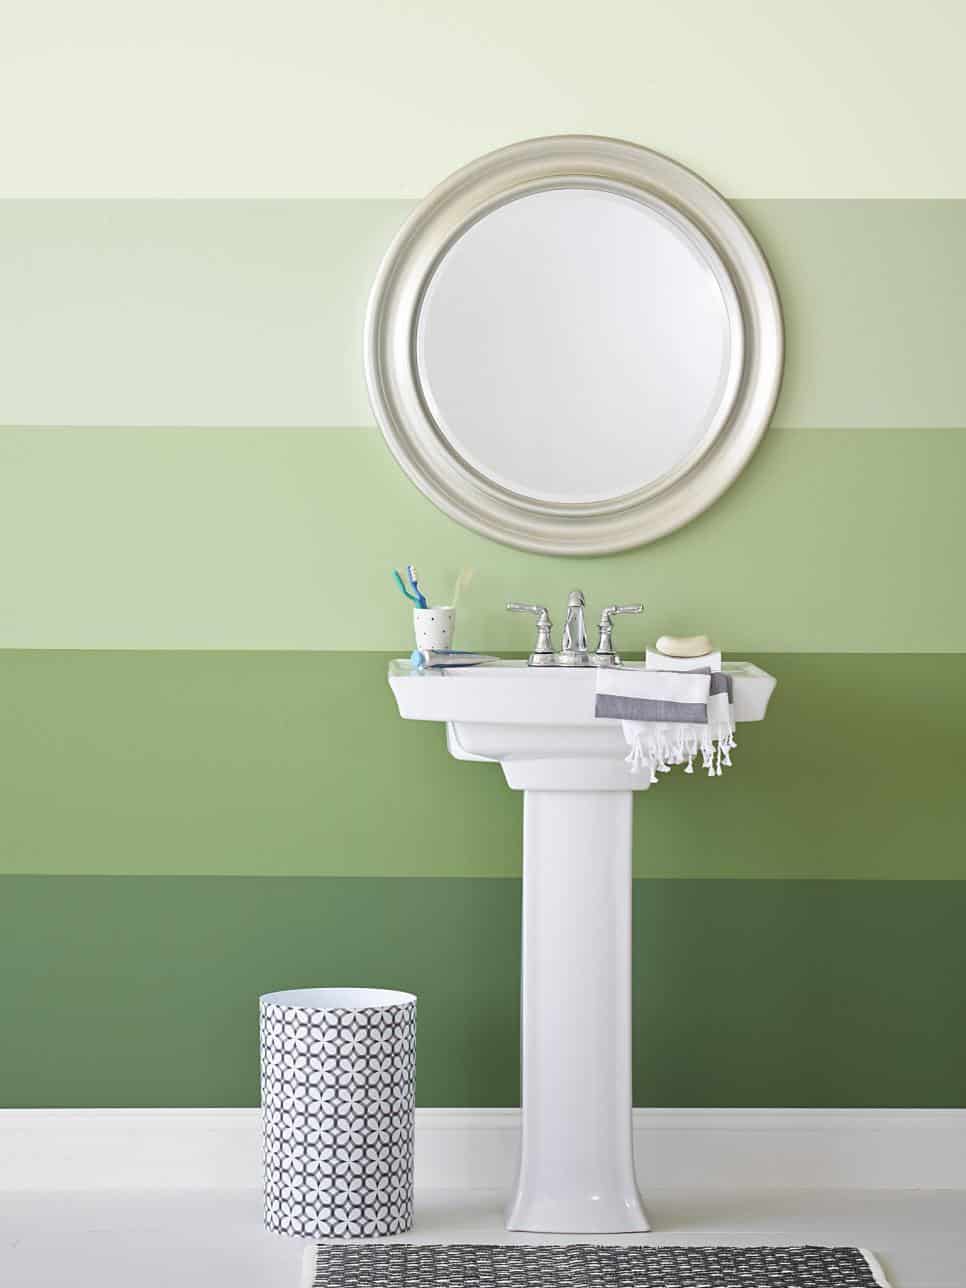 Go bold or go home is the perfect way of describing using green bold stripes in your bathroom.